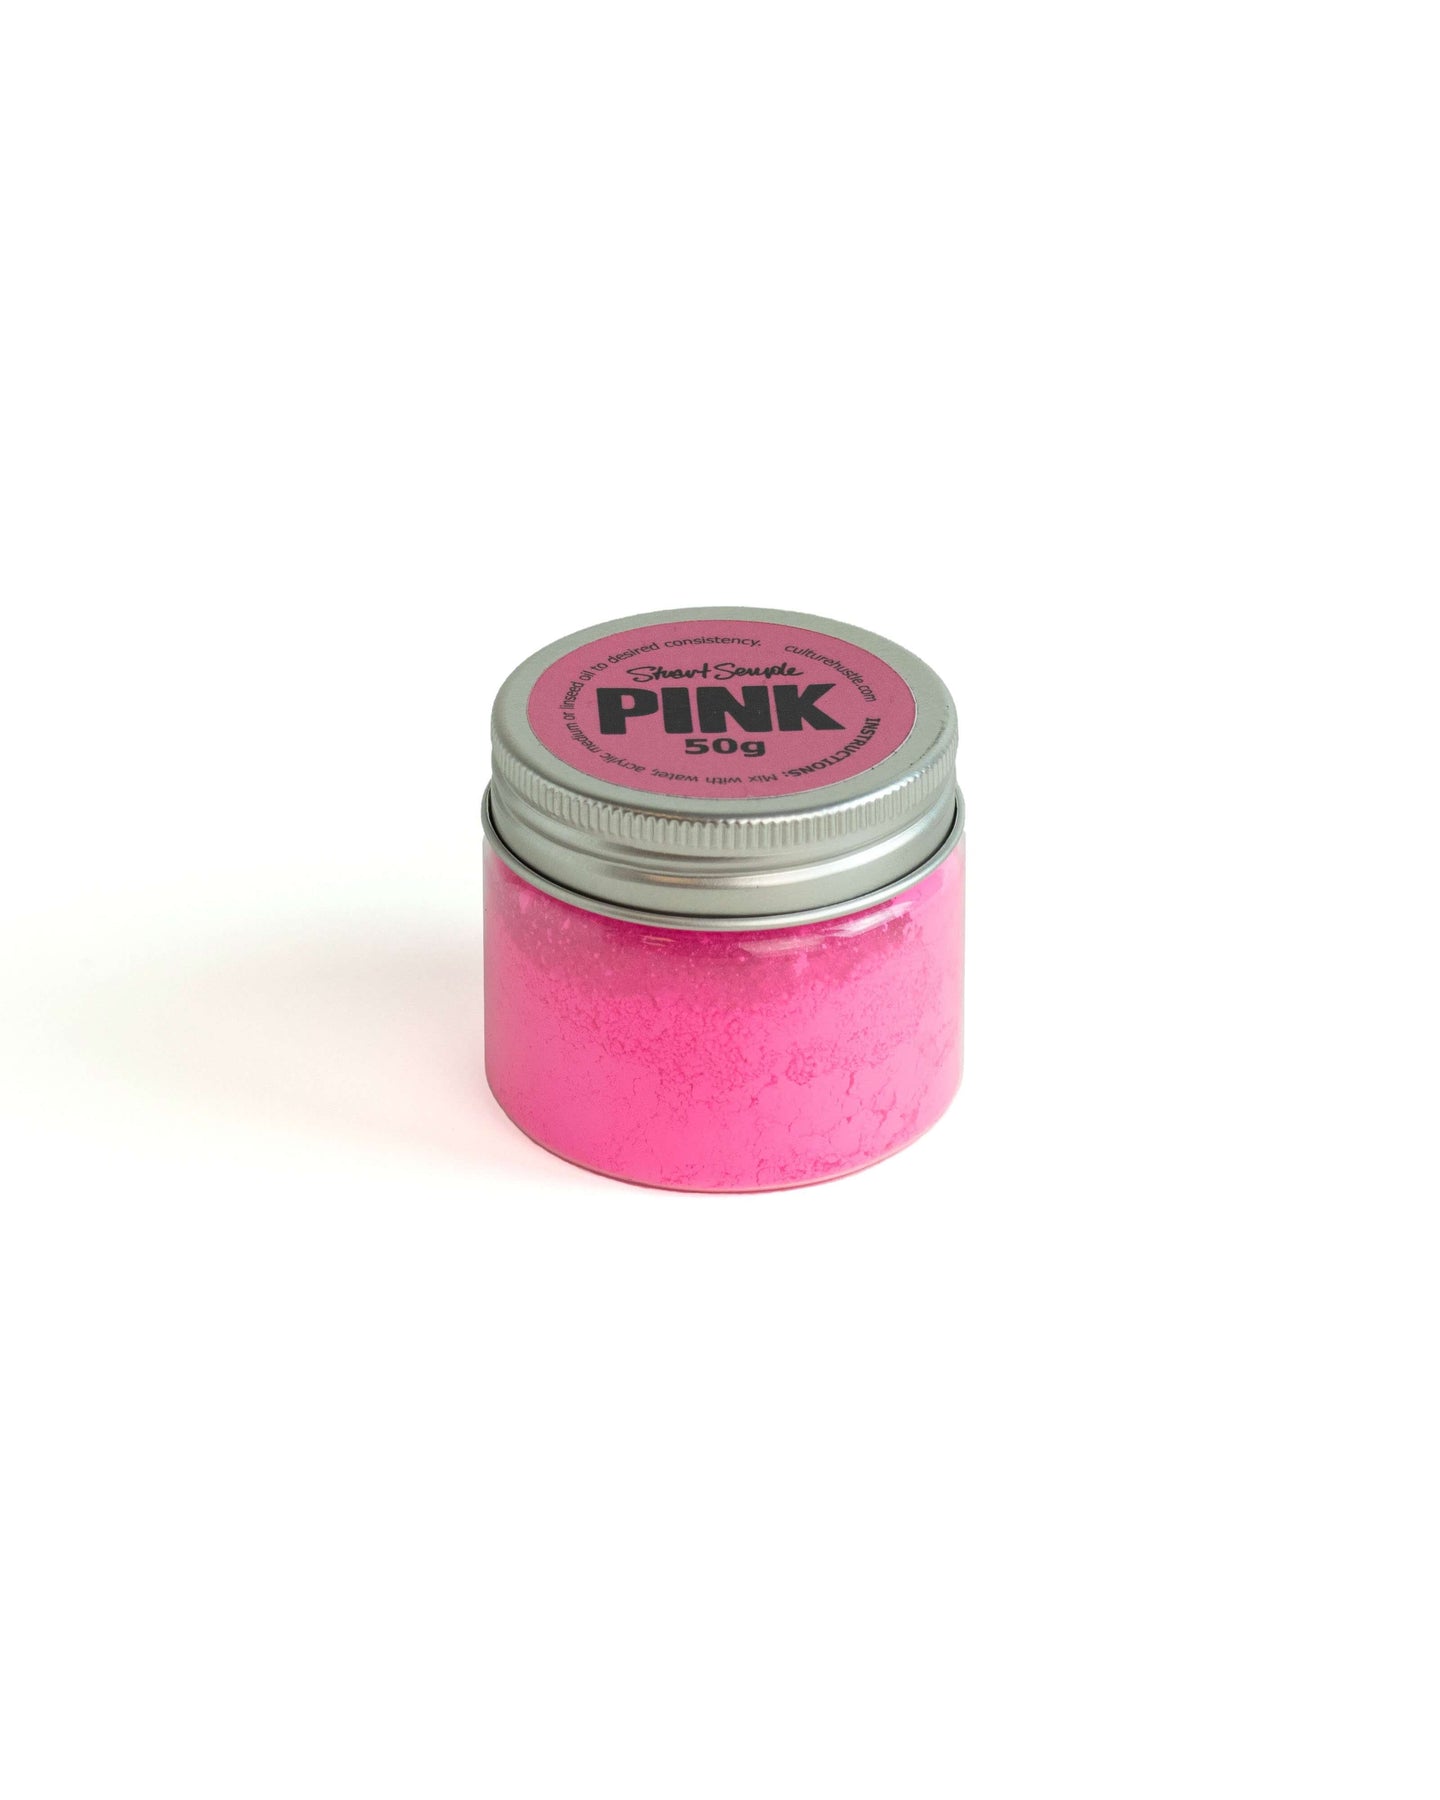 Pinkie - The Barbiest Pink | Culture Hustle